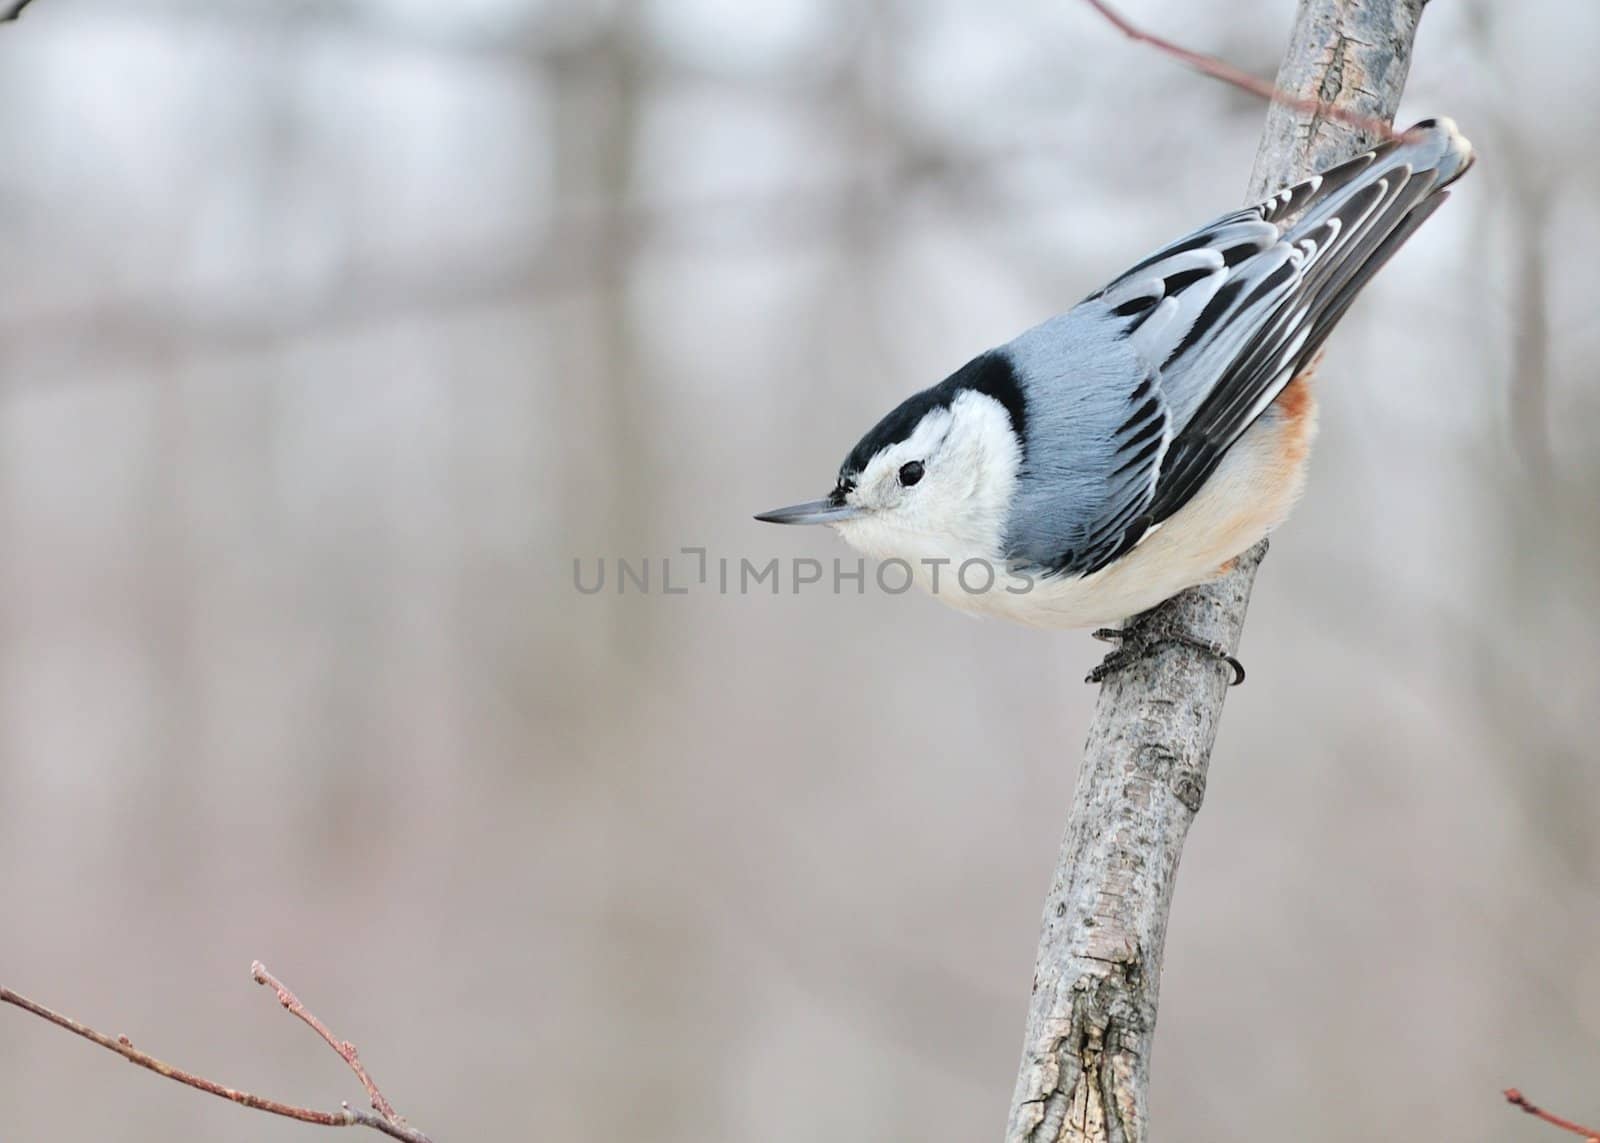 A nuthatch perched on the side of a tree branch.